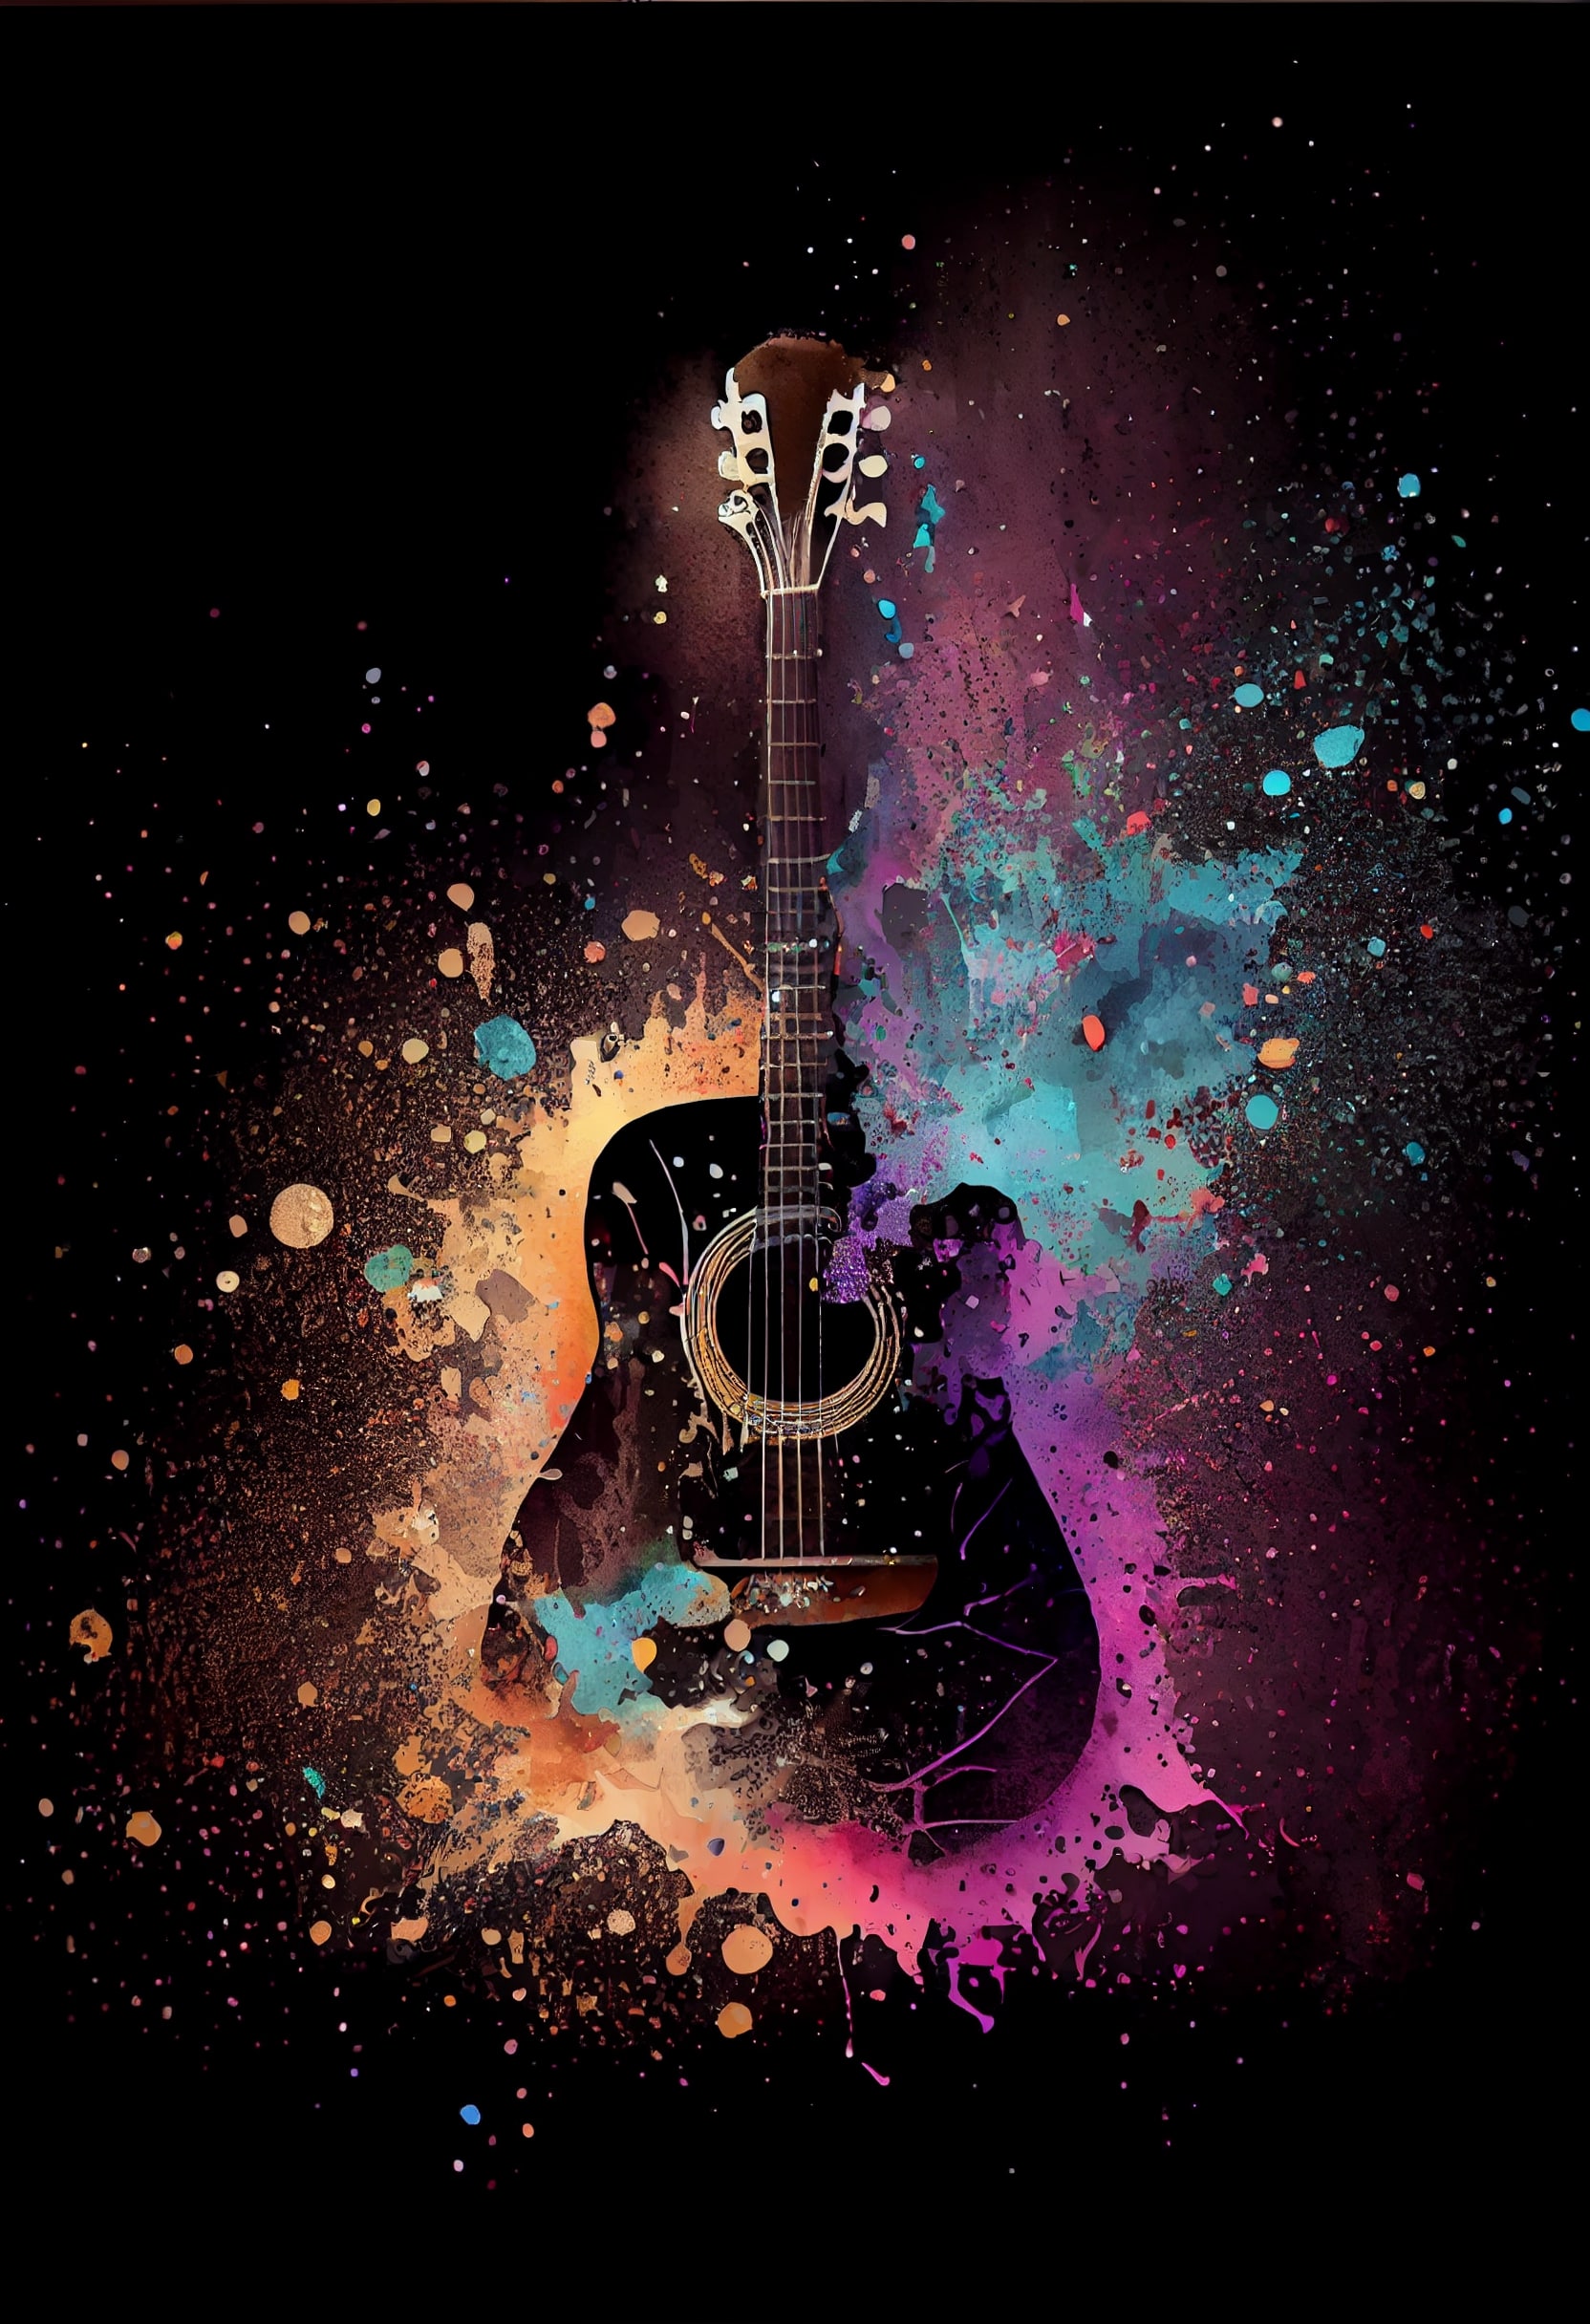 Guitar with colorful paint splatters on it.